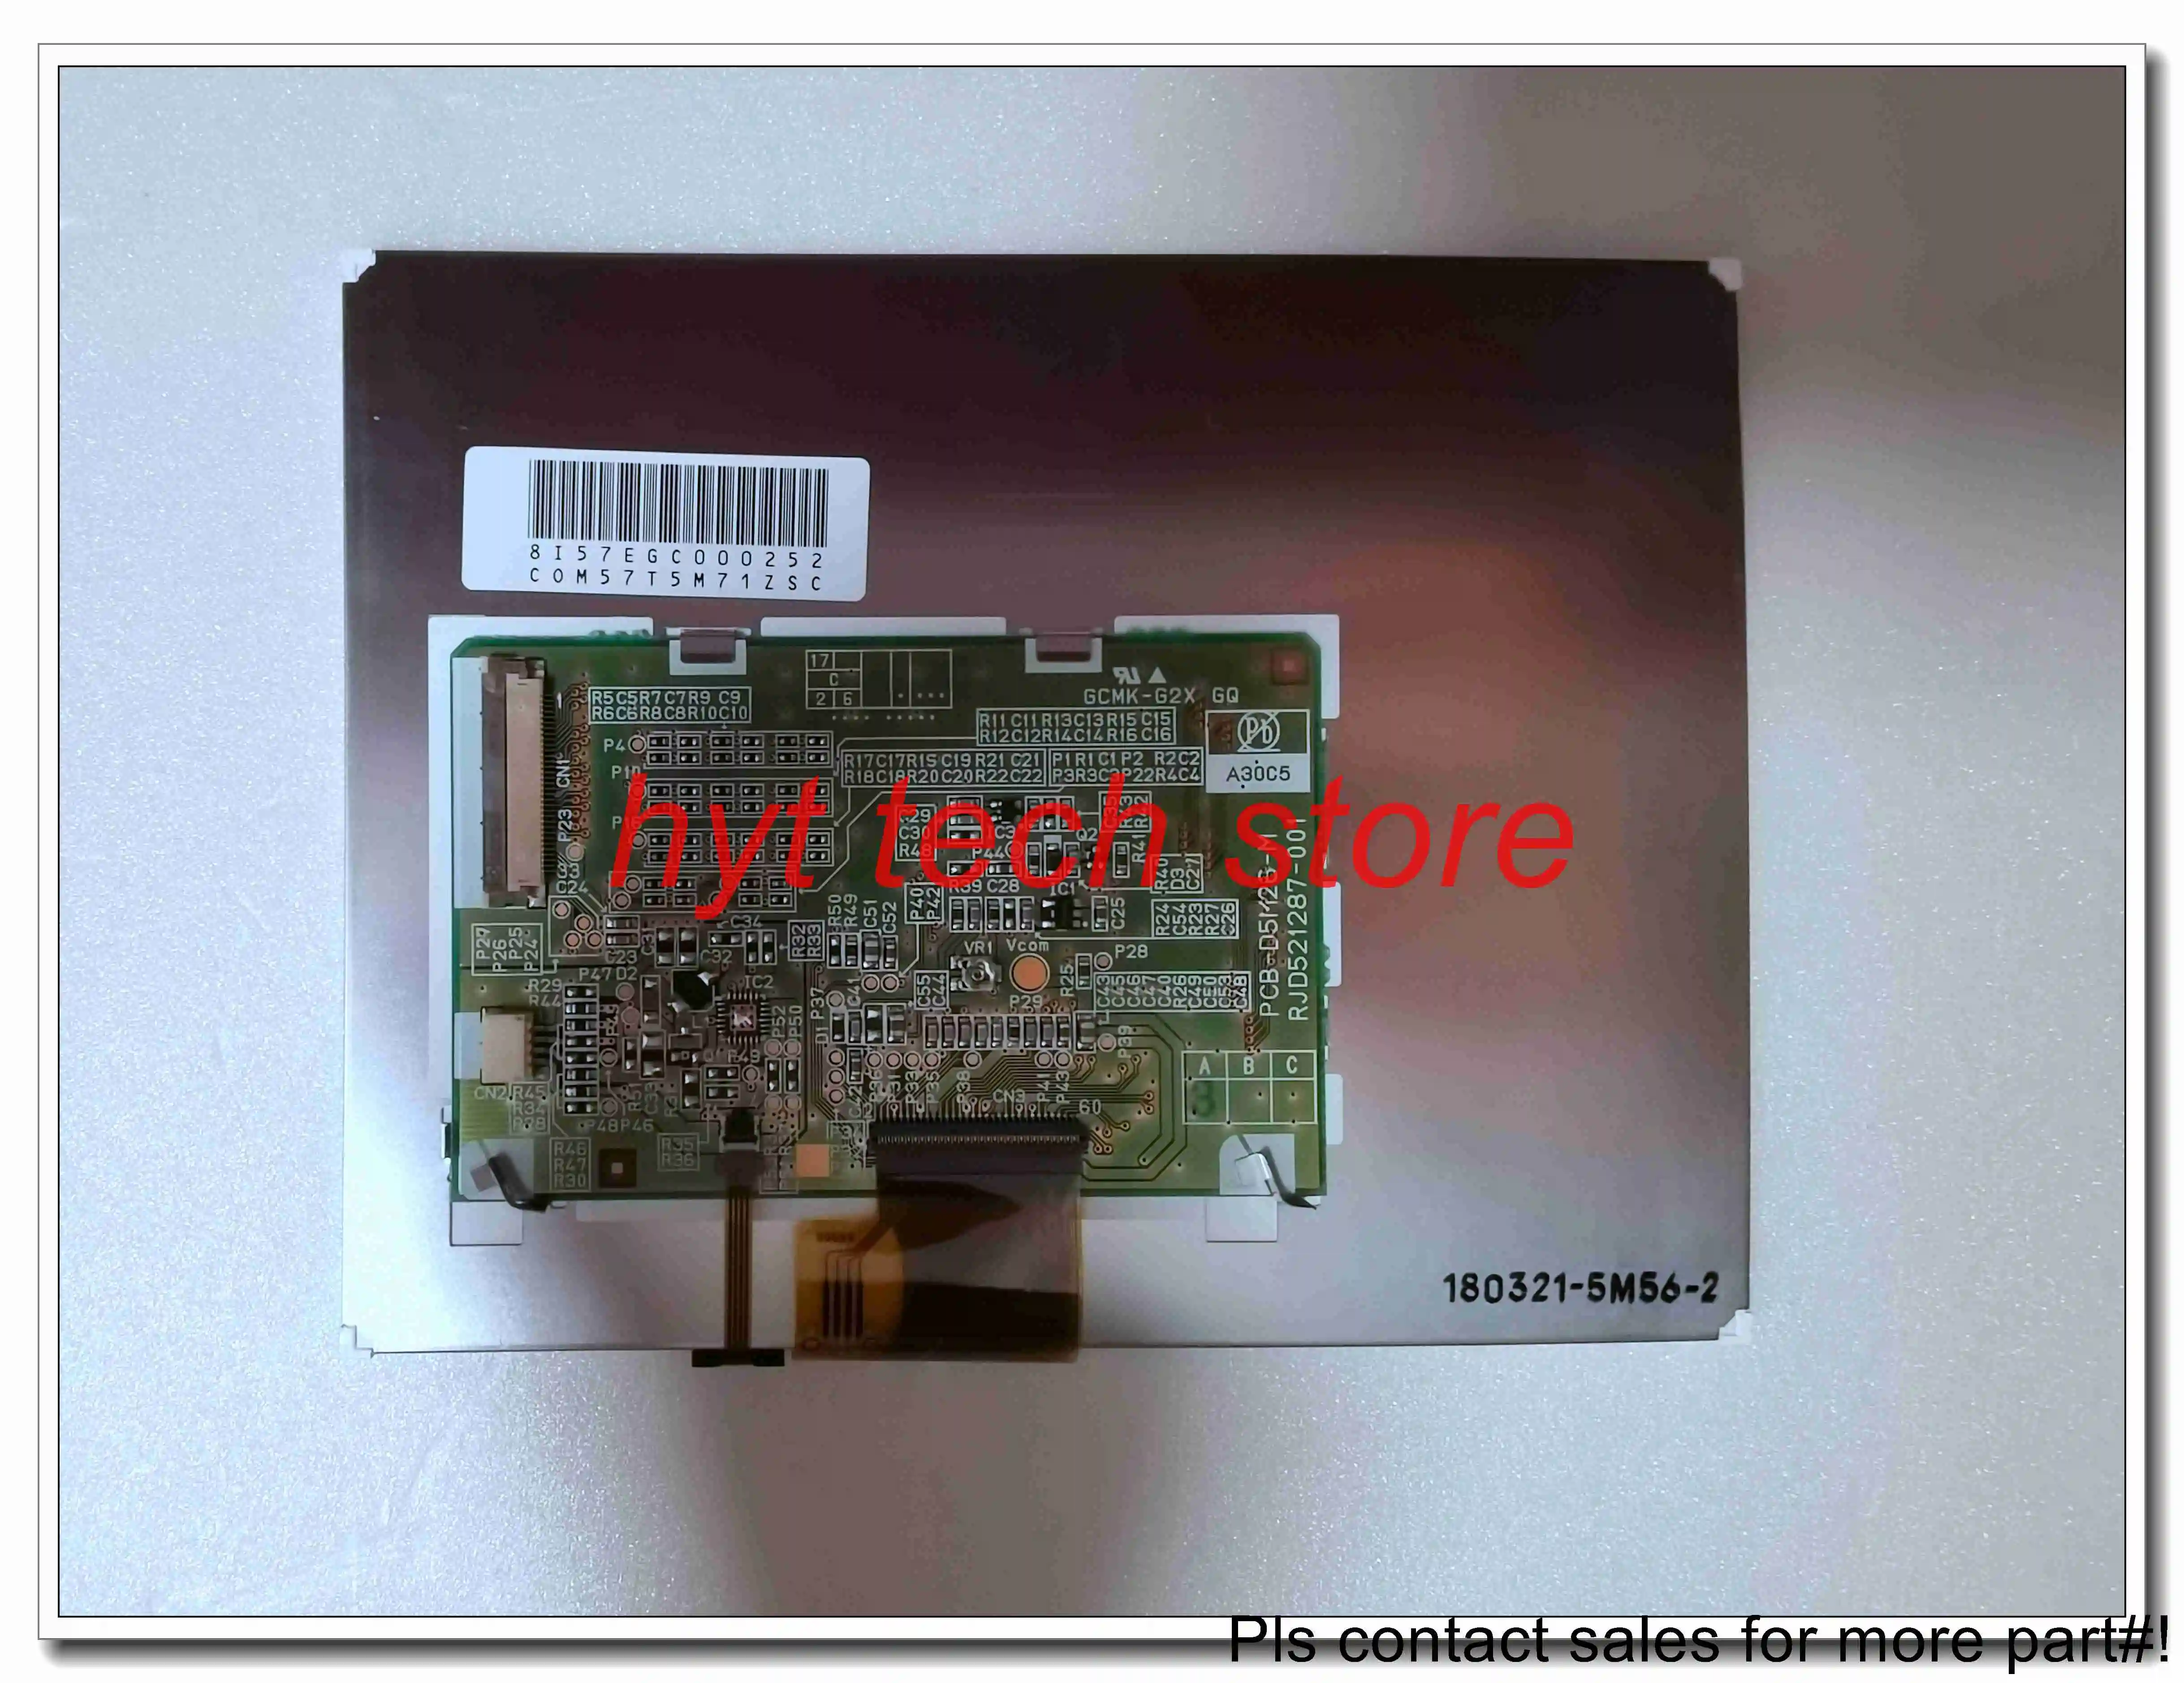 

COM57T5M71ZSC PCB-D5M26-M RJD521287-001 Original 5.7 inch LCD Panel, 100% tested before shipment